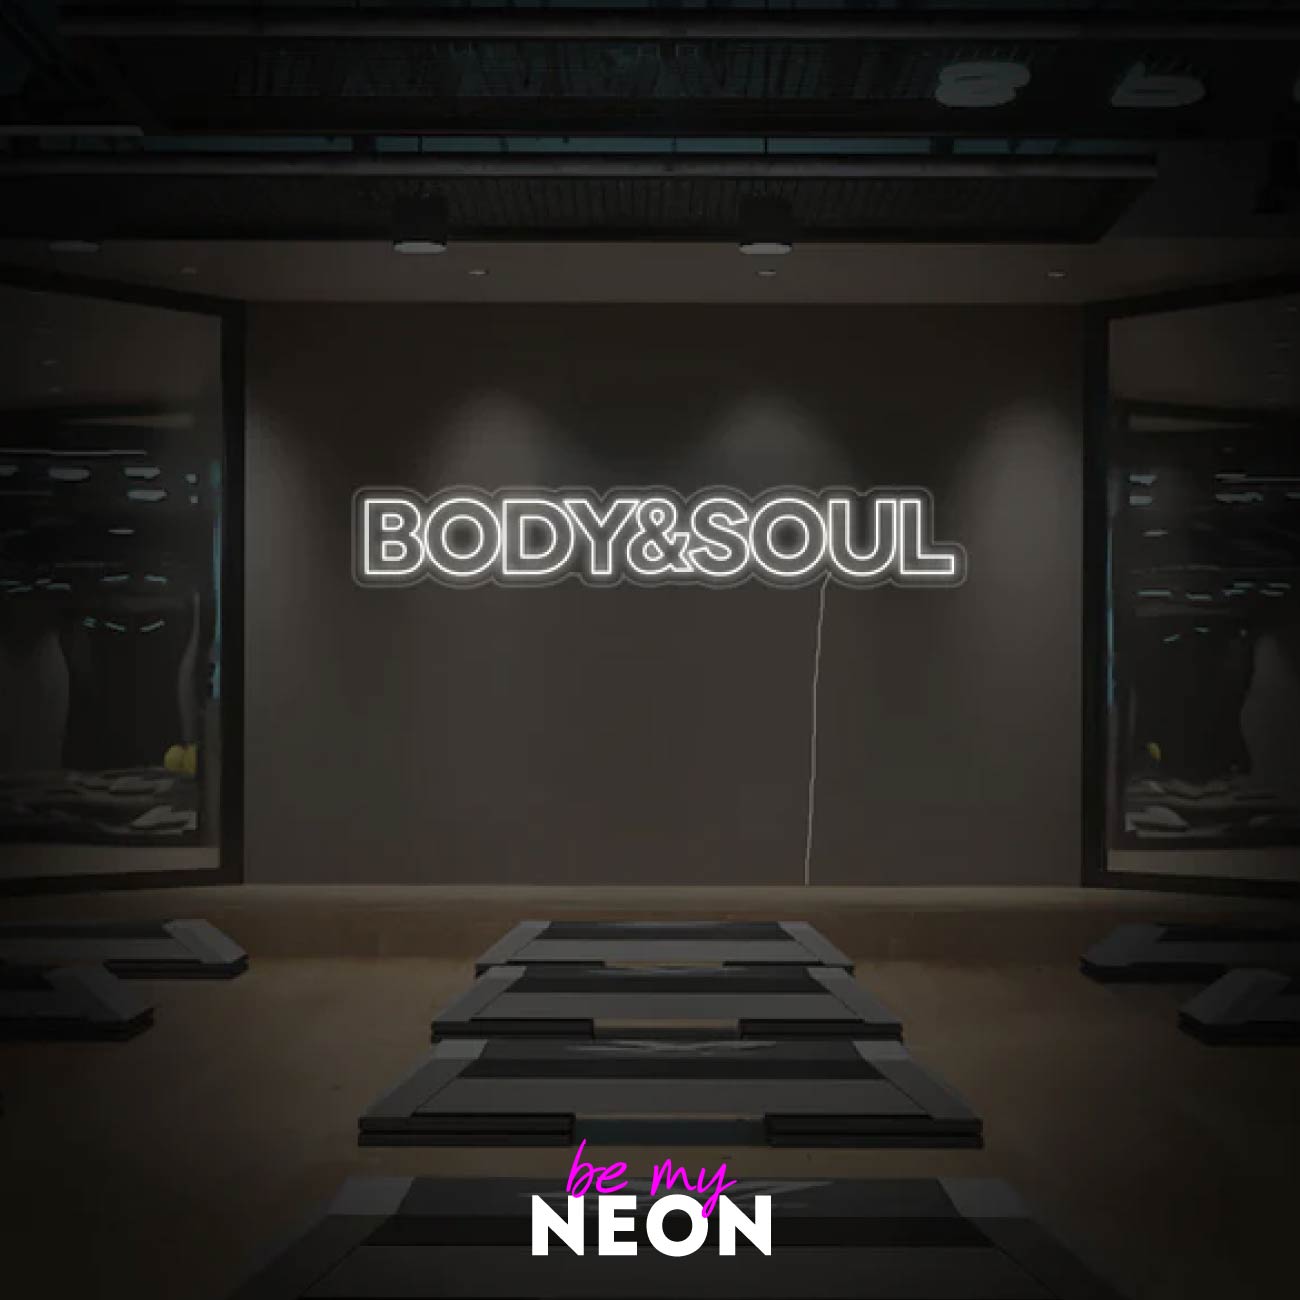 "Body and Soul - Gym Fitness" LED Neonschild